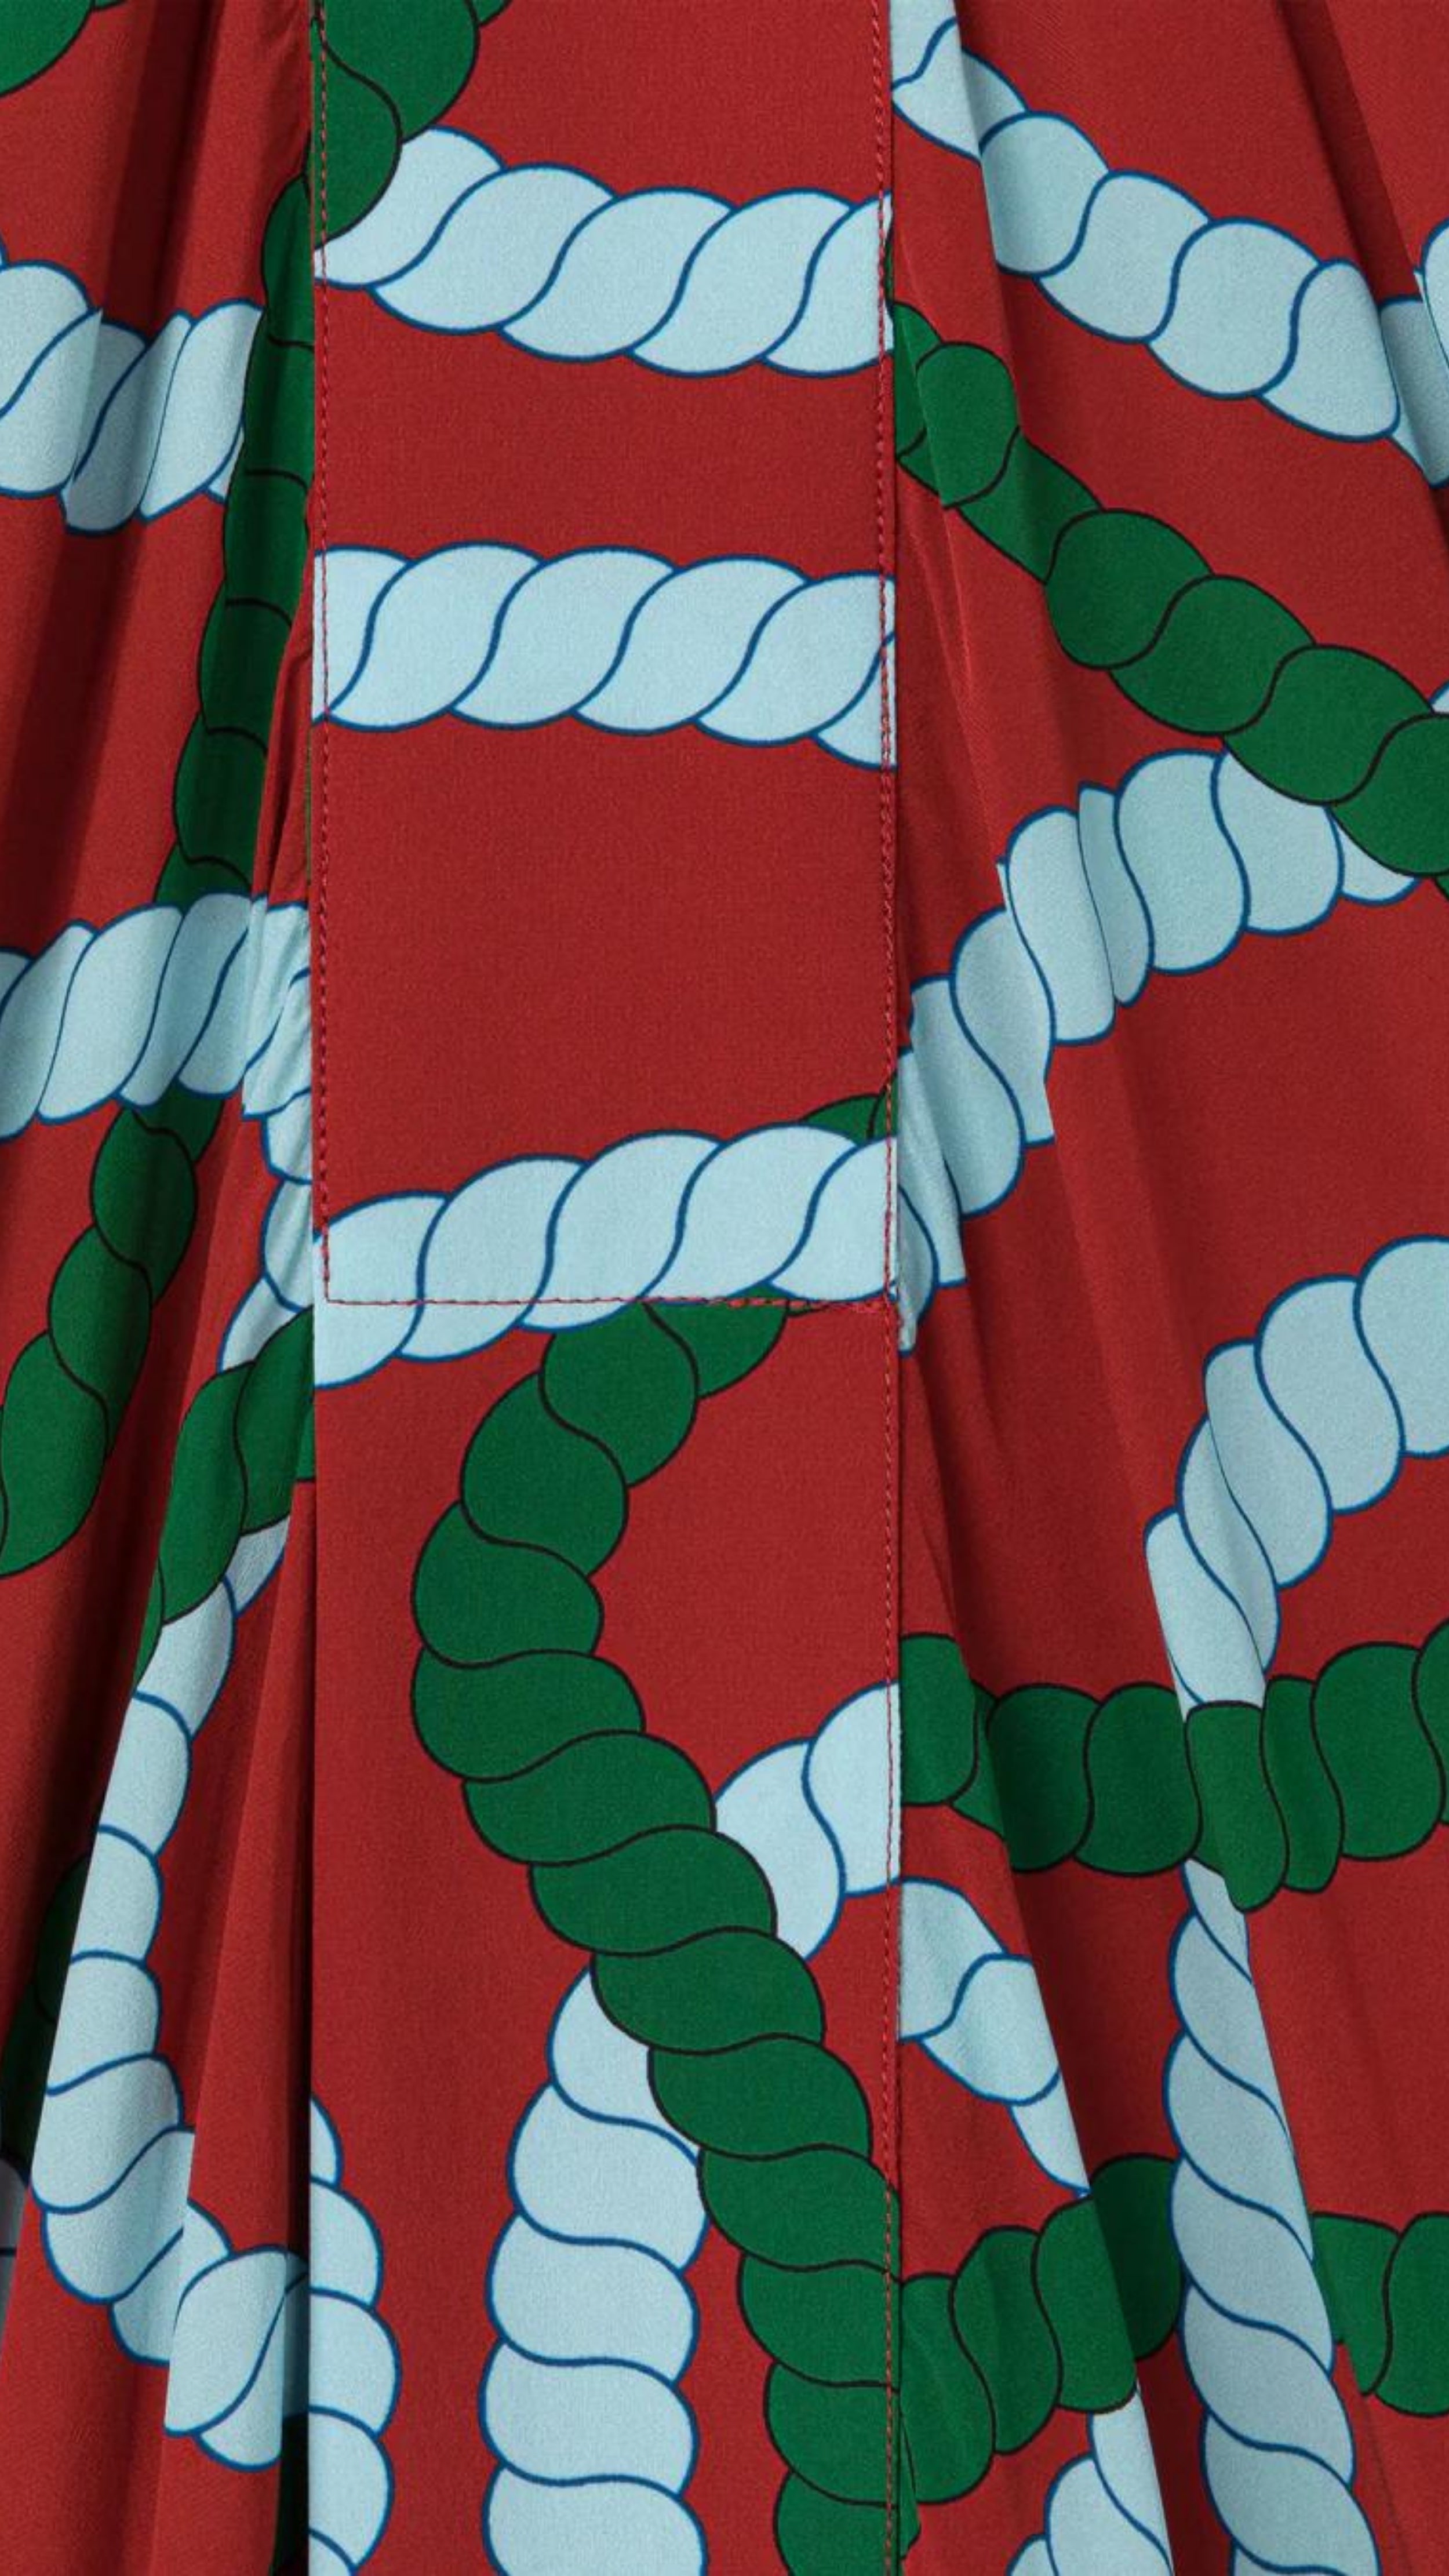 AZ Factory Colville Molly Molloy Lucinda Chambers, Printed Draped Midi Dress. Midi dress with long sleeves and a v cut neckline. It's a rust red with intertwining  rope pattern in green and sky blue. Detail of pattern and material.